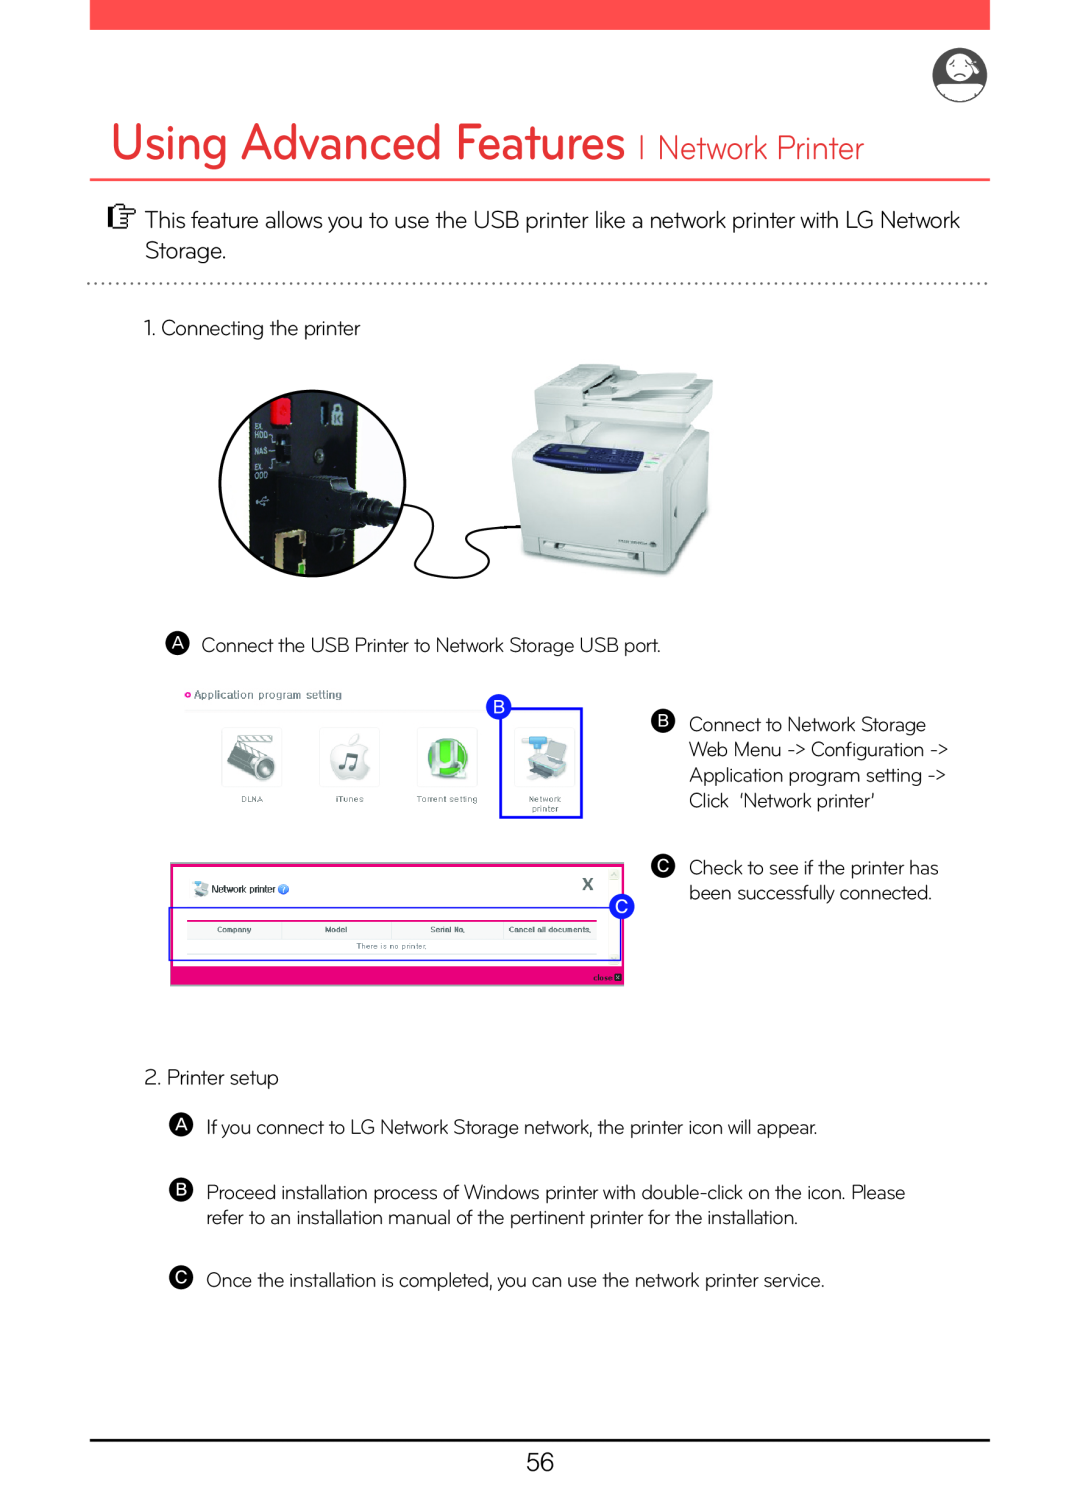 LG Electronics N2A2, N2R5, N1A1, N1T1, N1T3 Using Advanced Features l Network Printer, Connecting the printer, Printer setup 